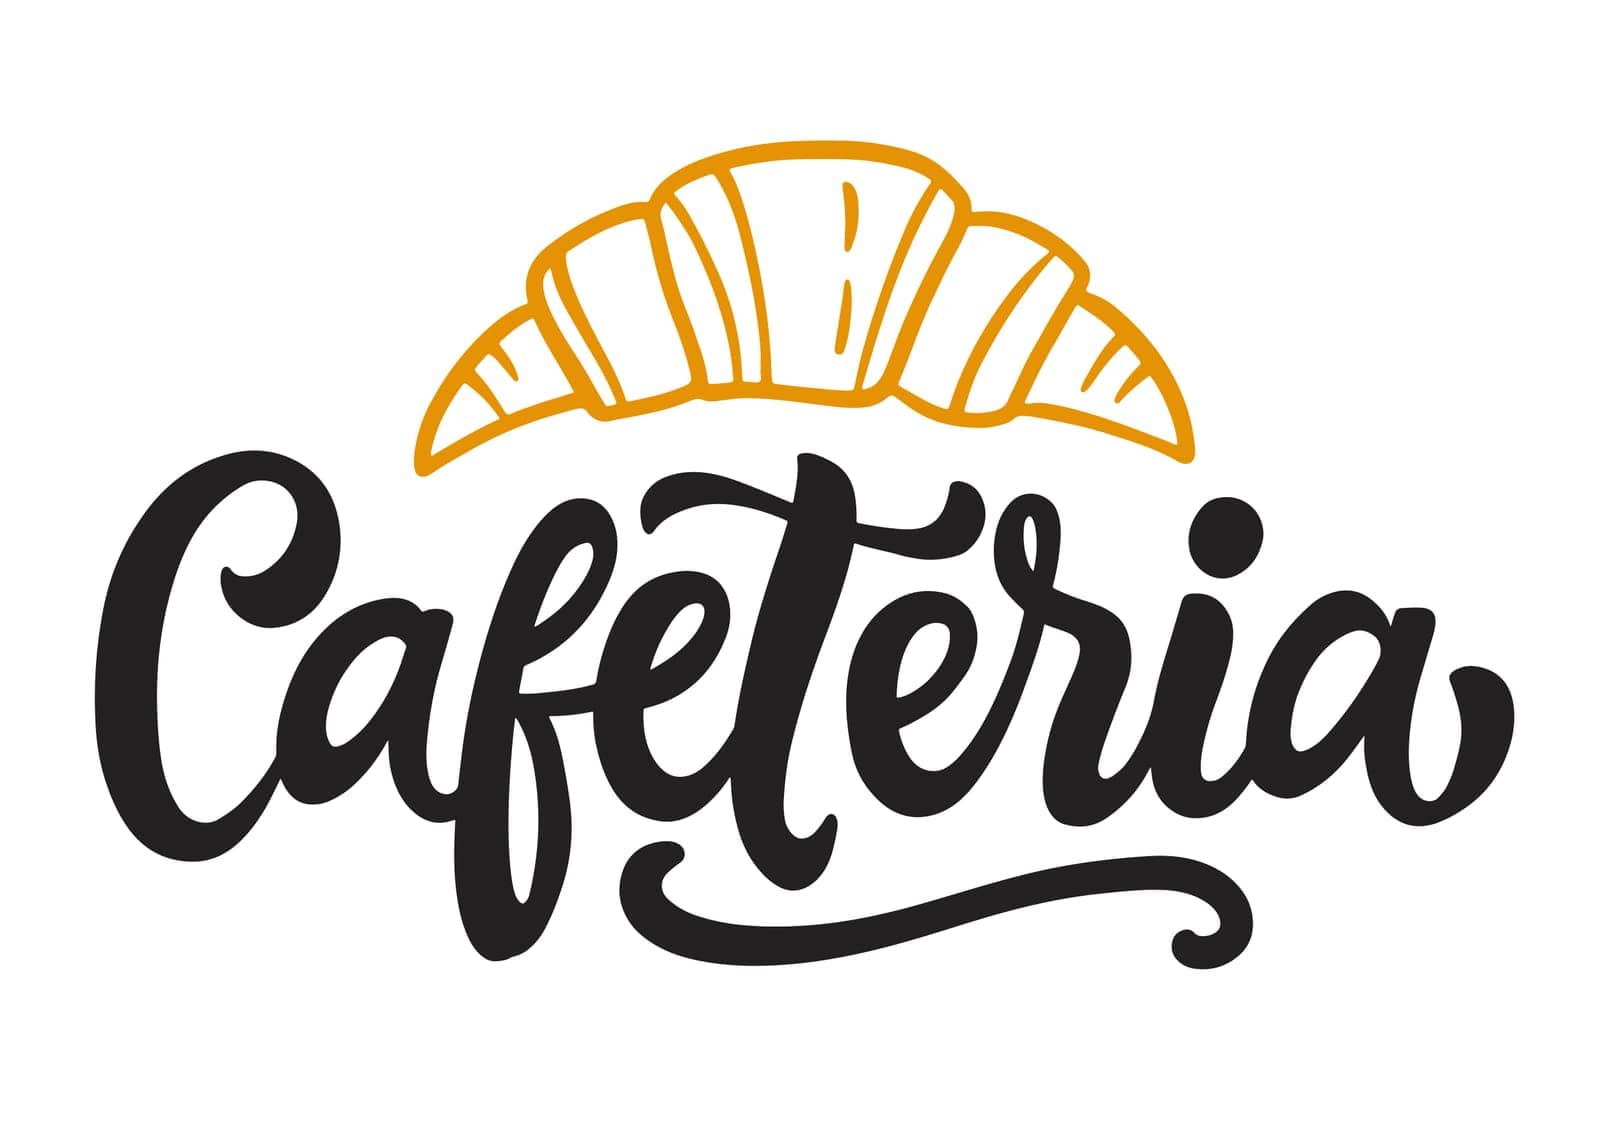 Cafeteria Inscription Logo. Hand Written Lettering by katrinelly